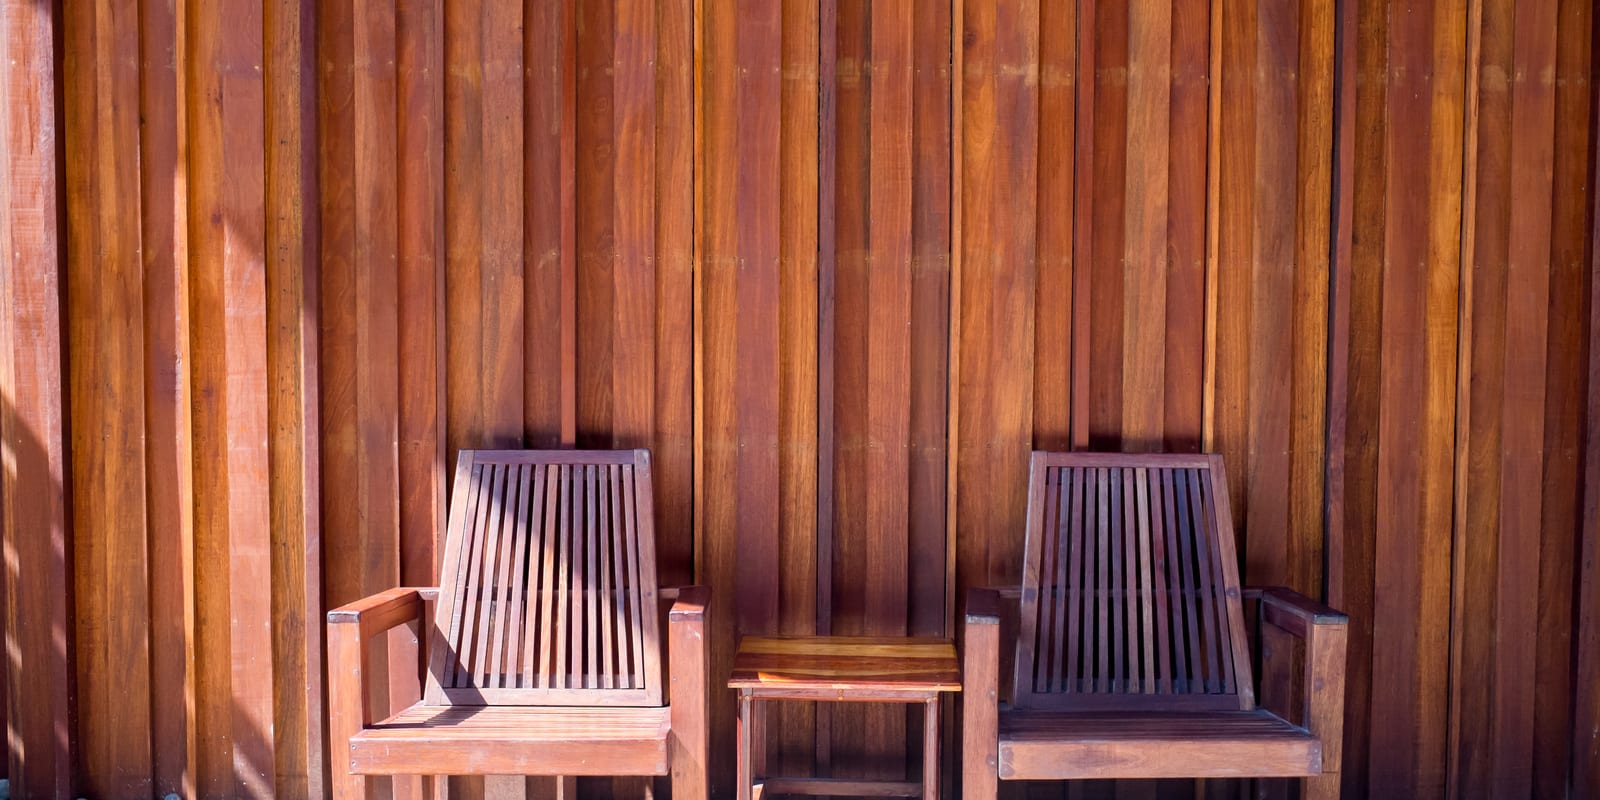 How to Keep Your Furniture from Fading in the Sun from UV Rays